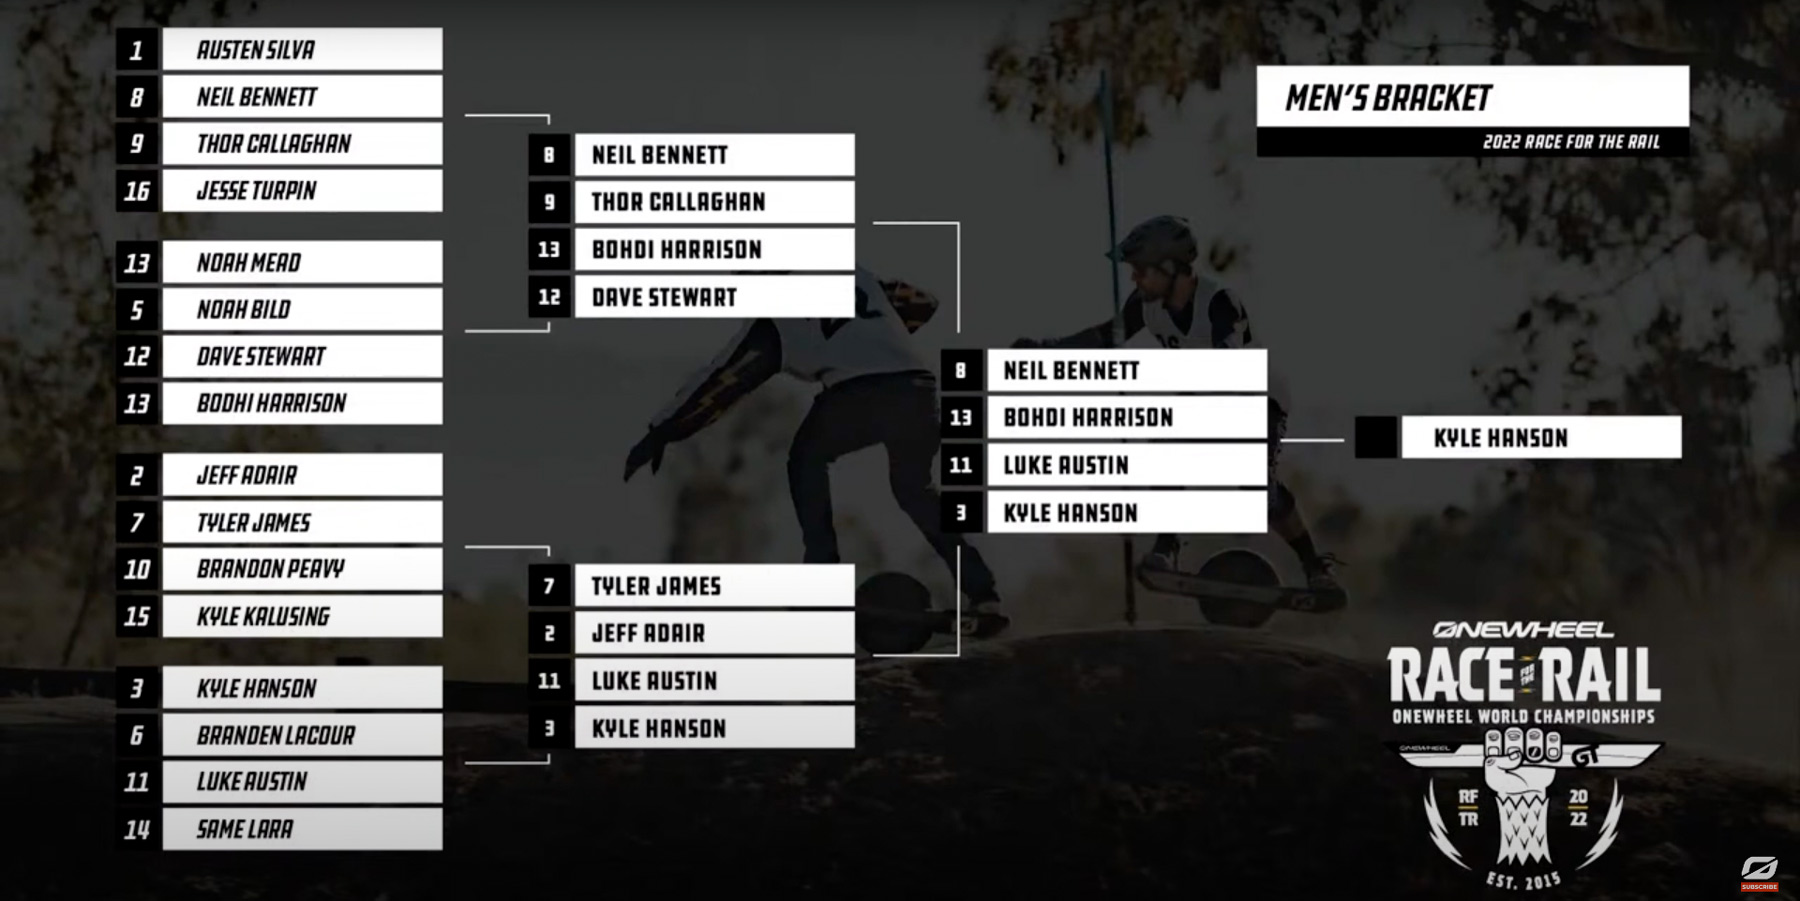 Race for the Rail 2022 men's bracket from Onewheel Racing League